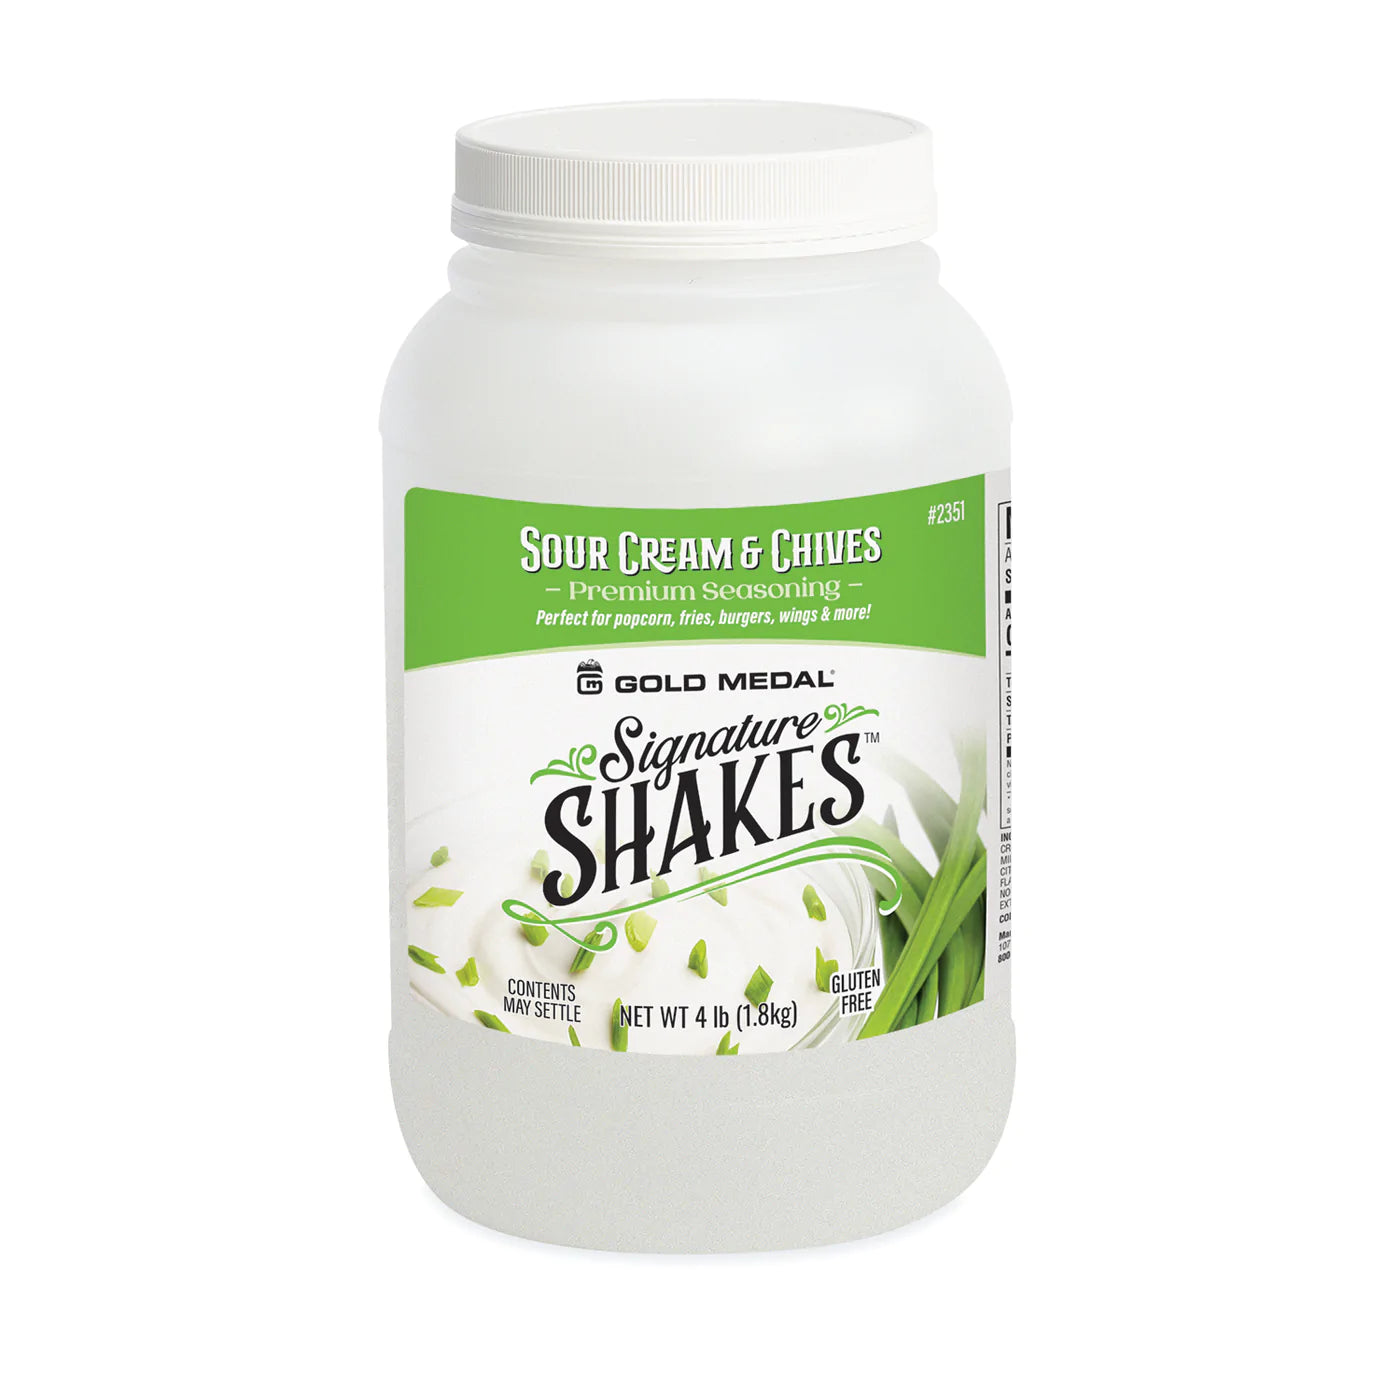 Gold Medal Sour Cream & Chives - Shake Ons